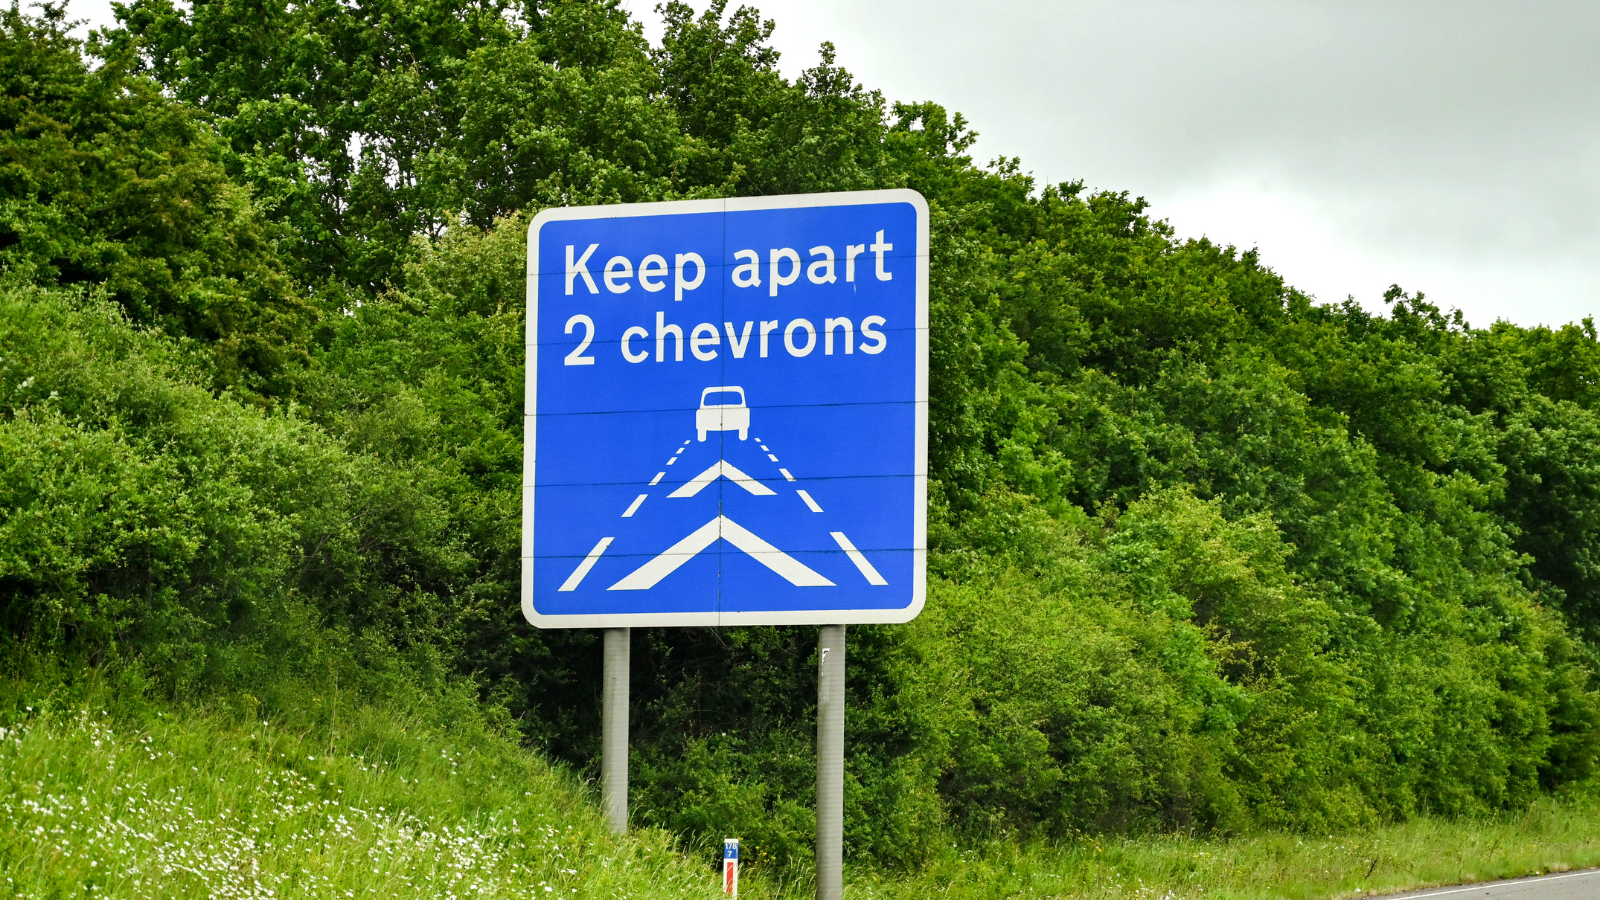 Blue motorway sign advising road users to maintain distance